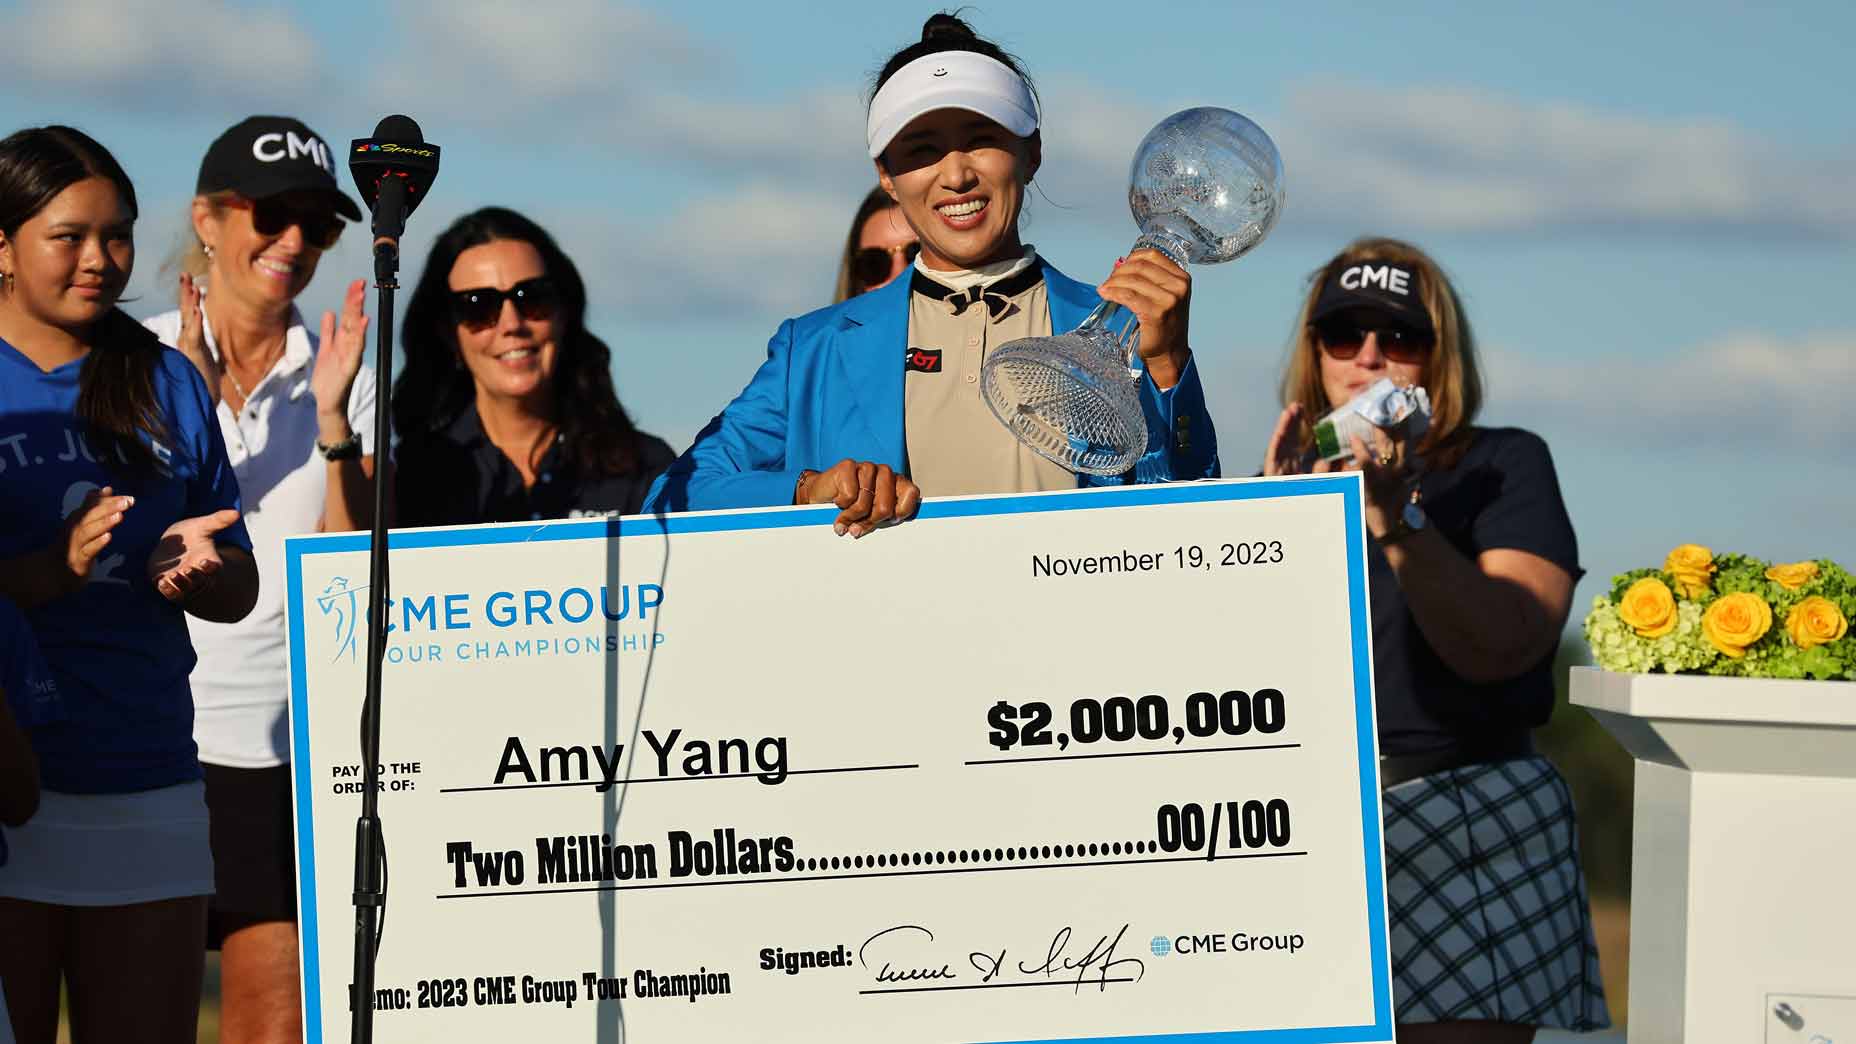 amy yang holds the trophy and verifies her victory at the 2023 cme group circuit championship